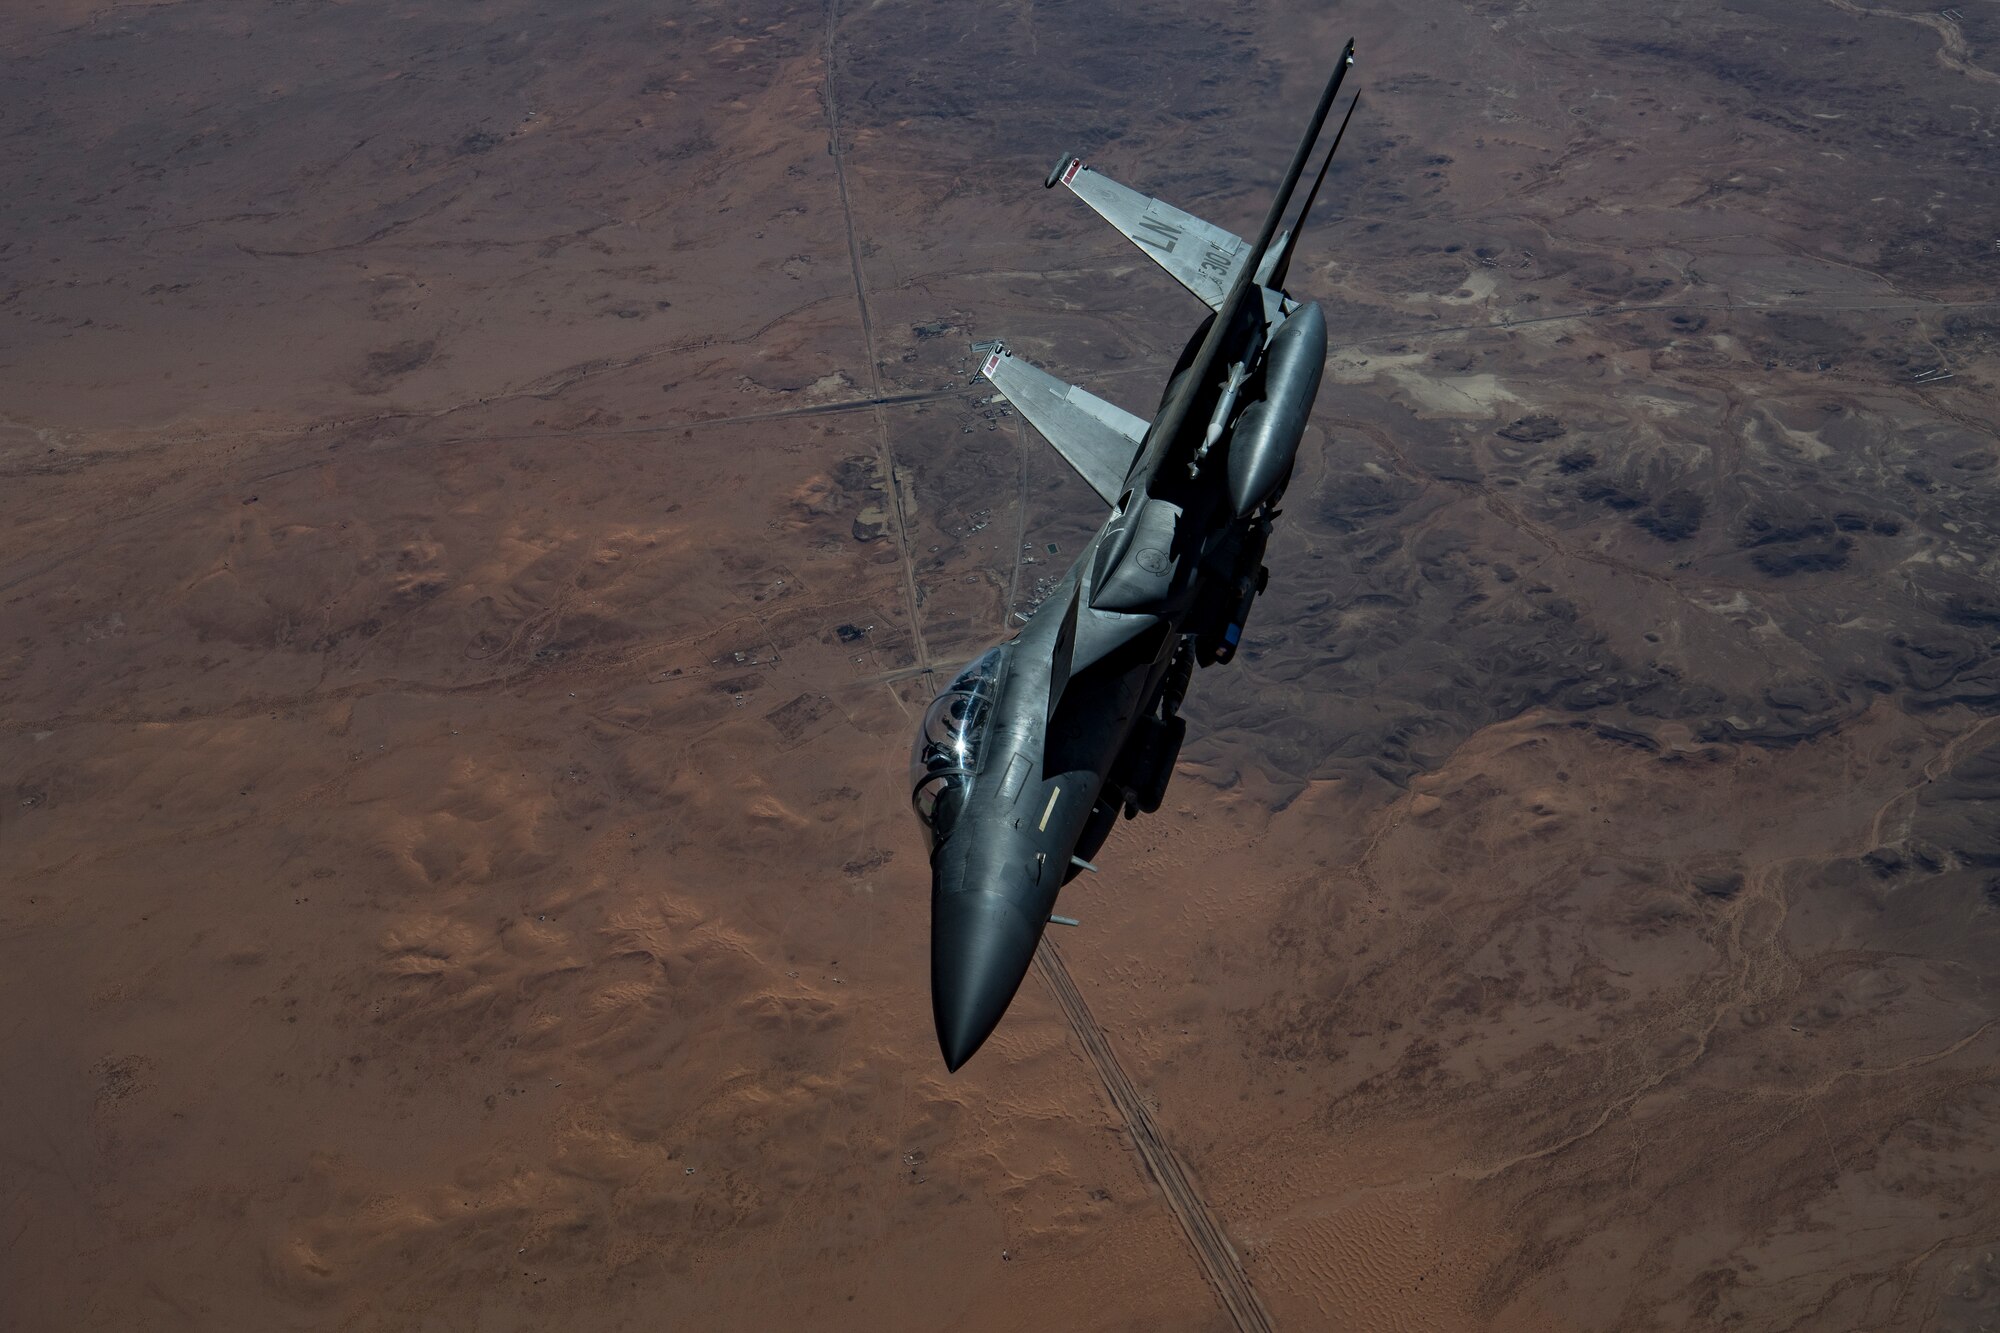 A U.S. Air Force F-15E Strike Eagle assigned to the 494th Expeditionary Fighter Squadron flies above the U.S. Central Command area of responsibility, Jan. 13, 2020.